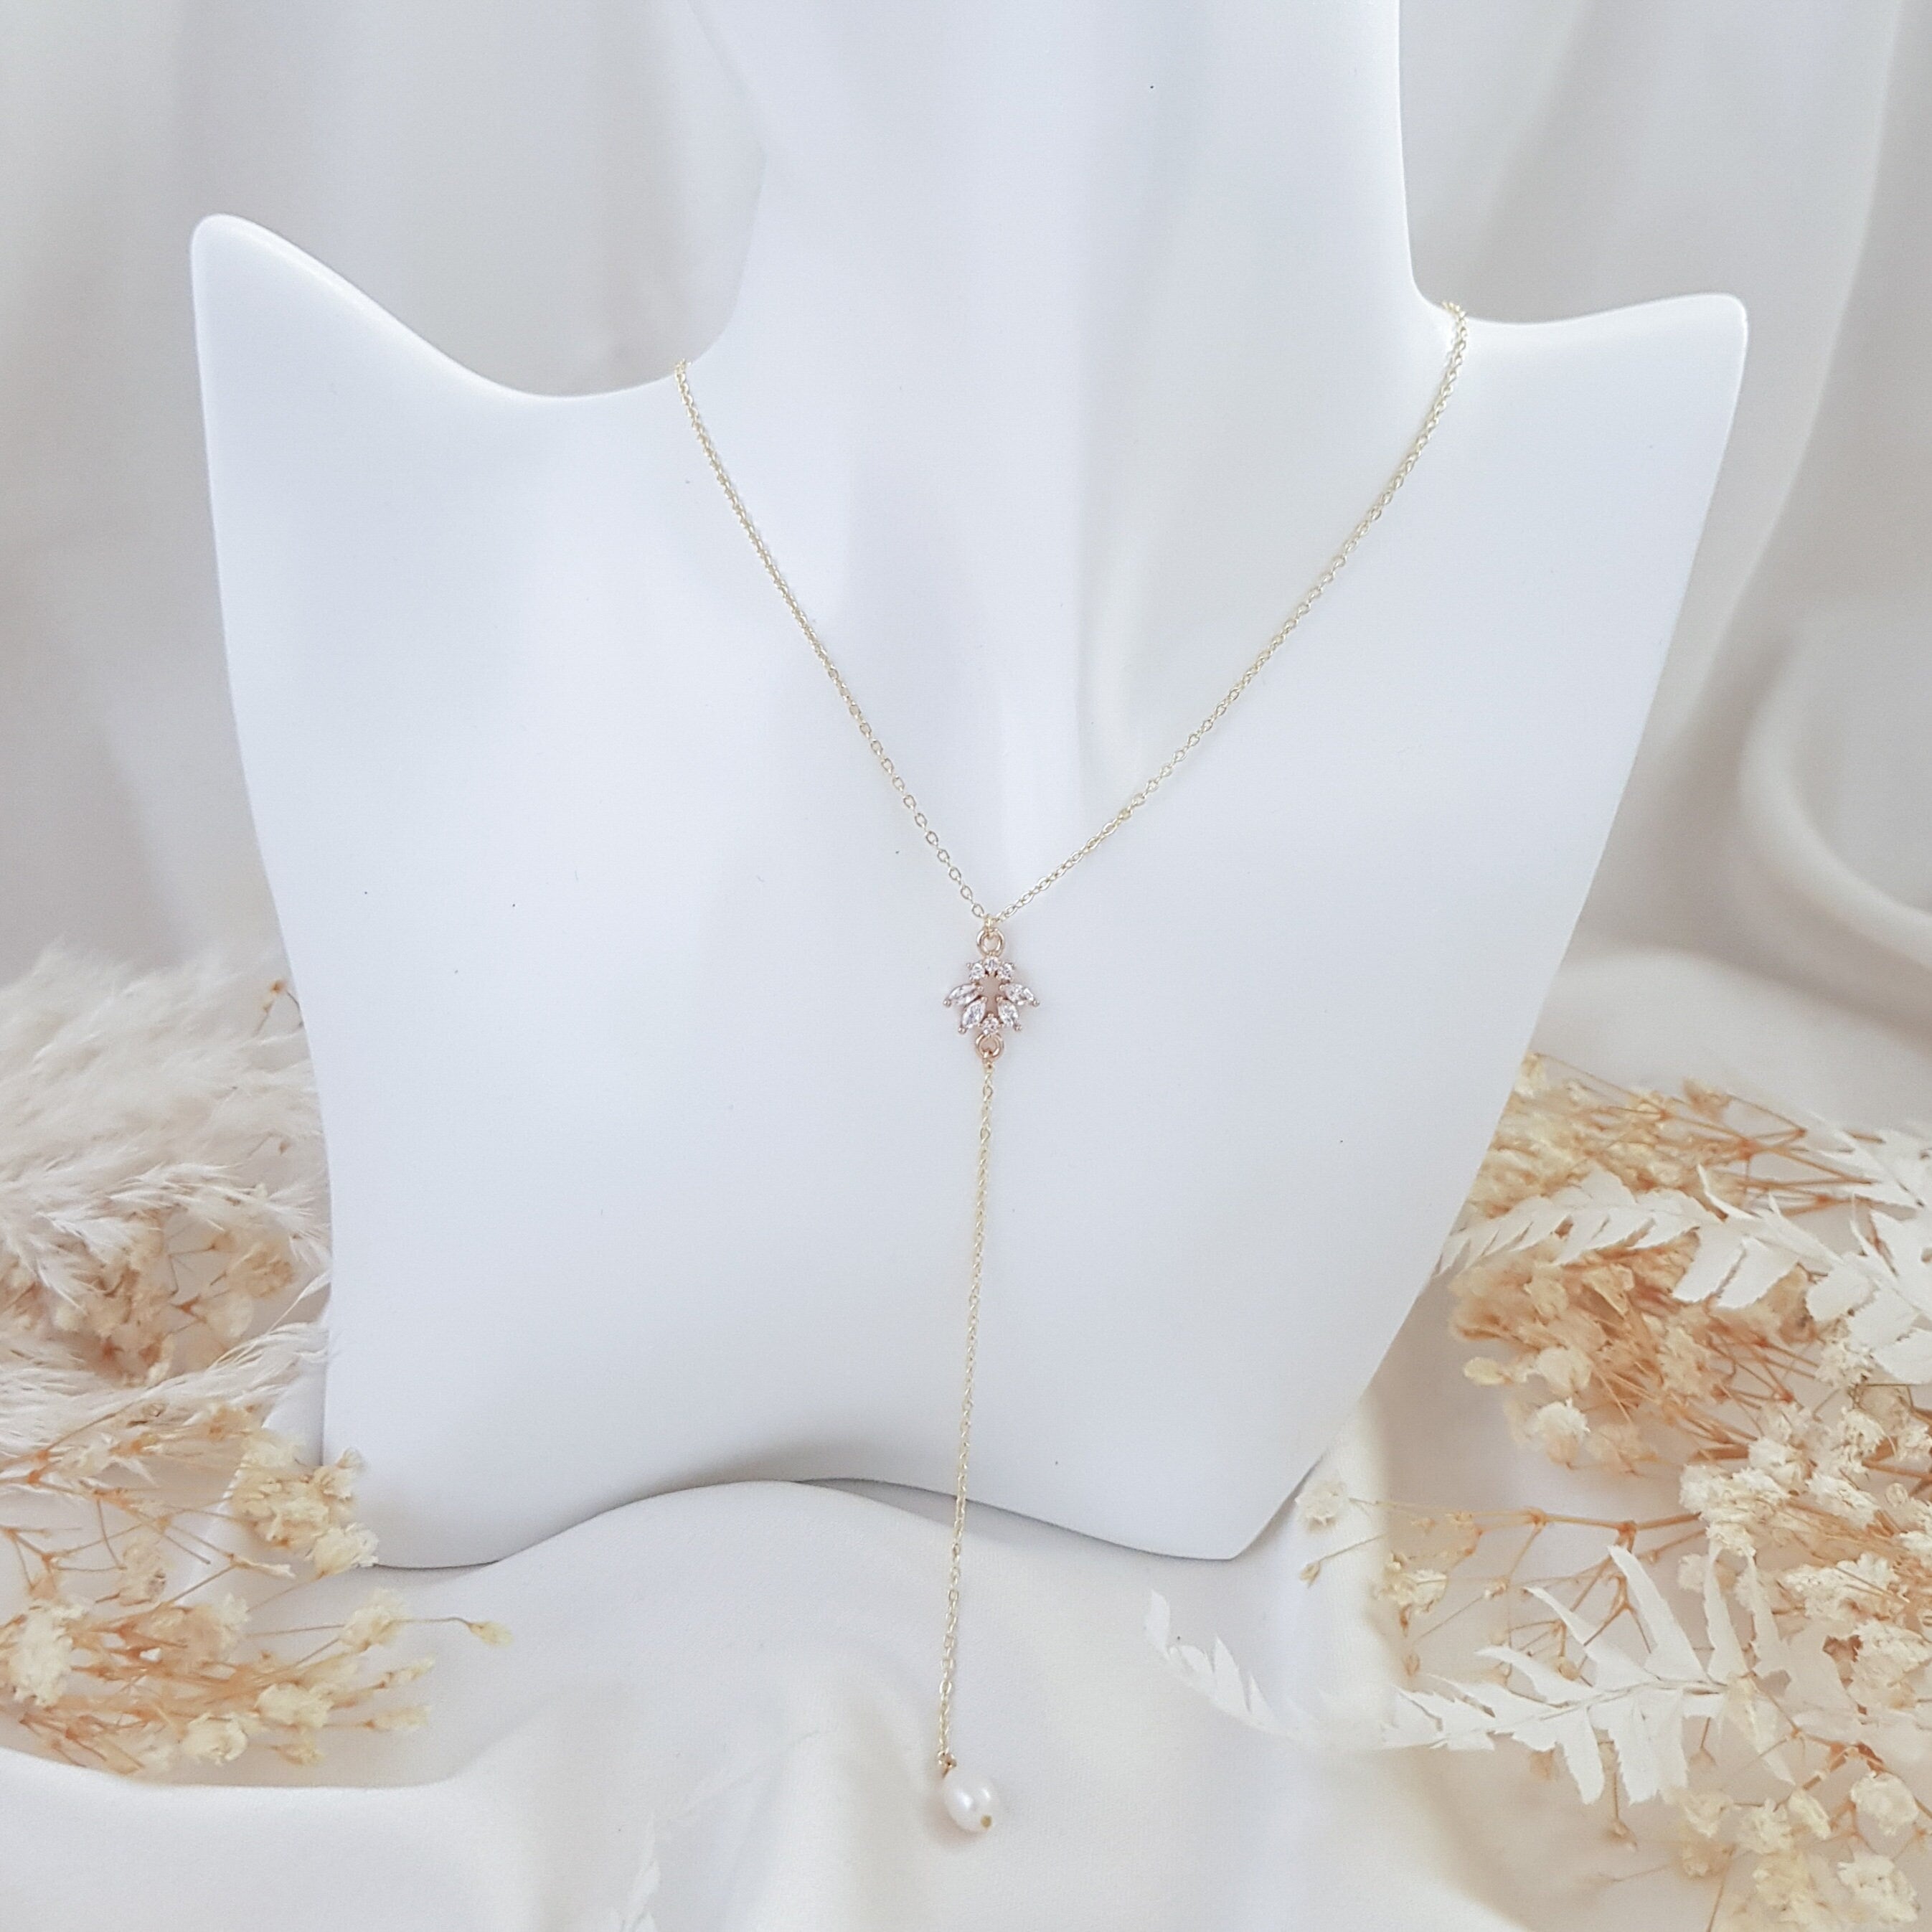 Bridal Necklace, Lariat Necklace, Vintage Style Necklace, Crystal Pearl Necklace, Gold Wedding Necklace, Bridesmaid Gift, Bridal Jewelry